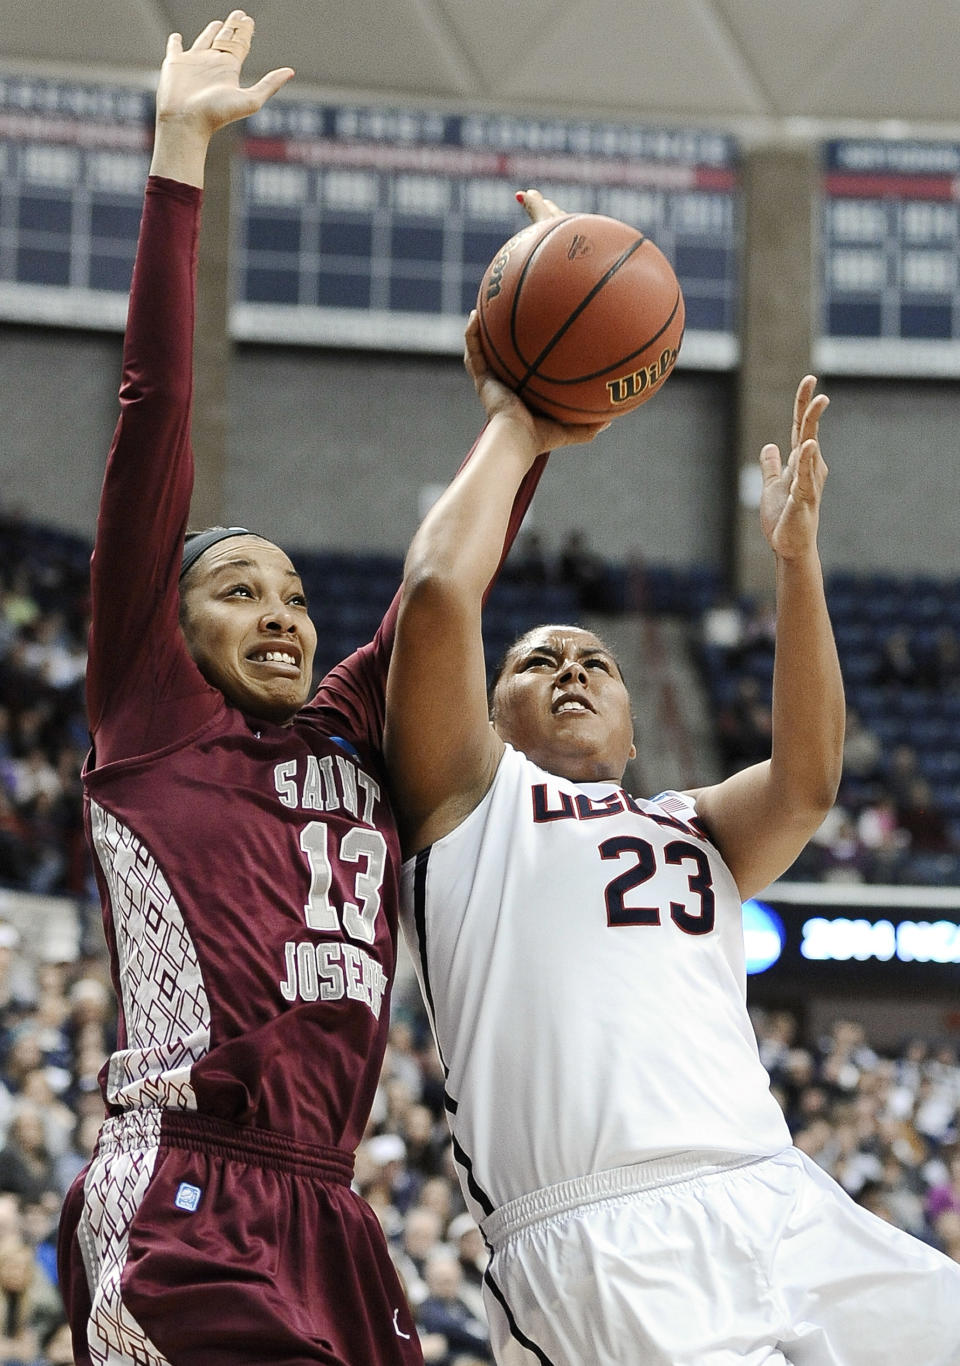 Saint Joseph's Ashley Robinson, left, fouls Connecticut's Kaleena Mosqueda-Lewis, right, as she makes a basket during the first half of a second-round game of the NCAA women's college basketball tournament, Tuesday, March 25, 2014, in Storrs, Conn. (AP Photo/Jessica Hill)